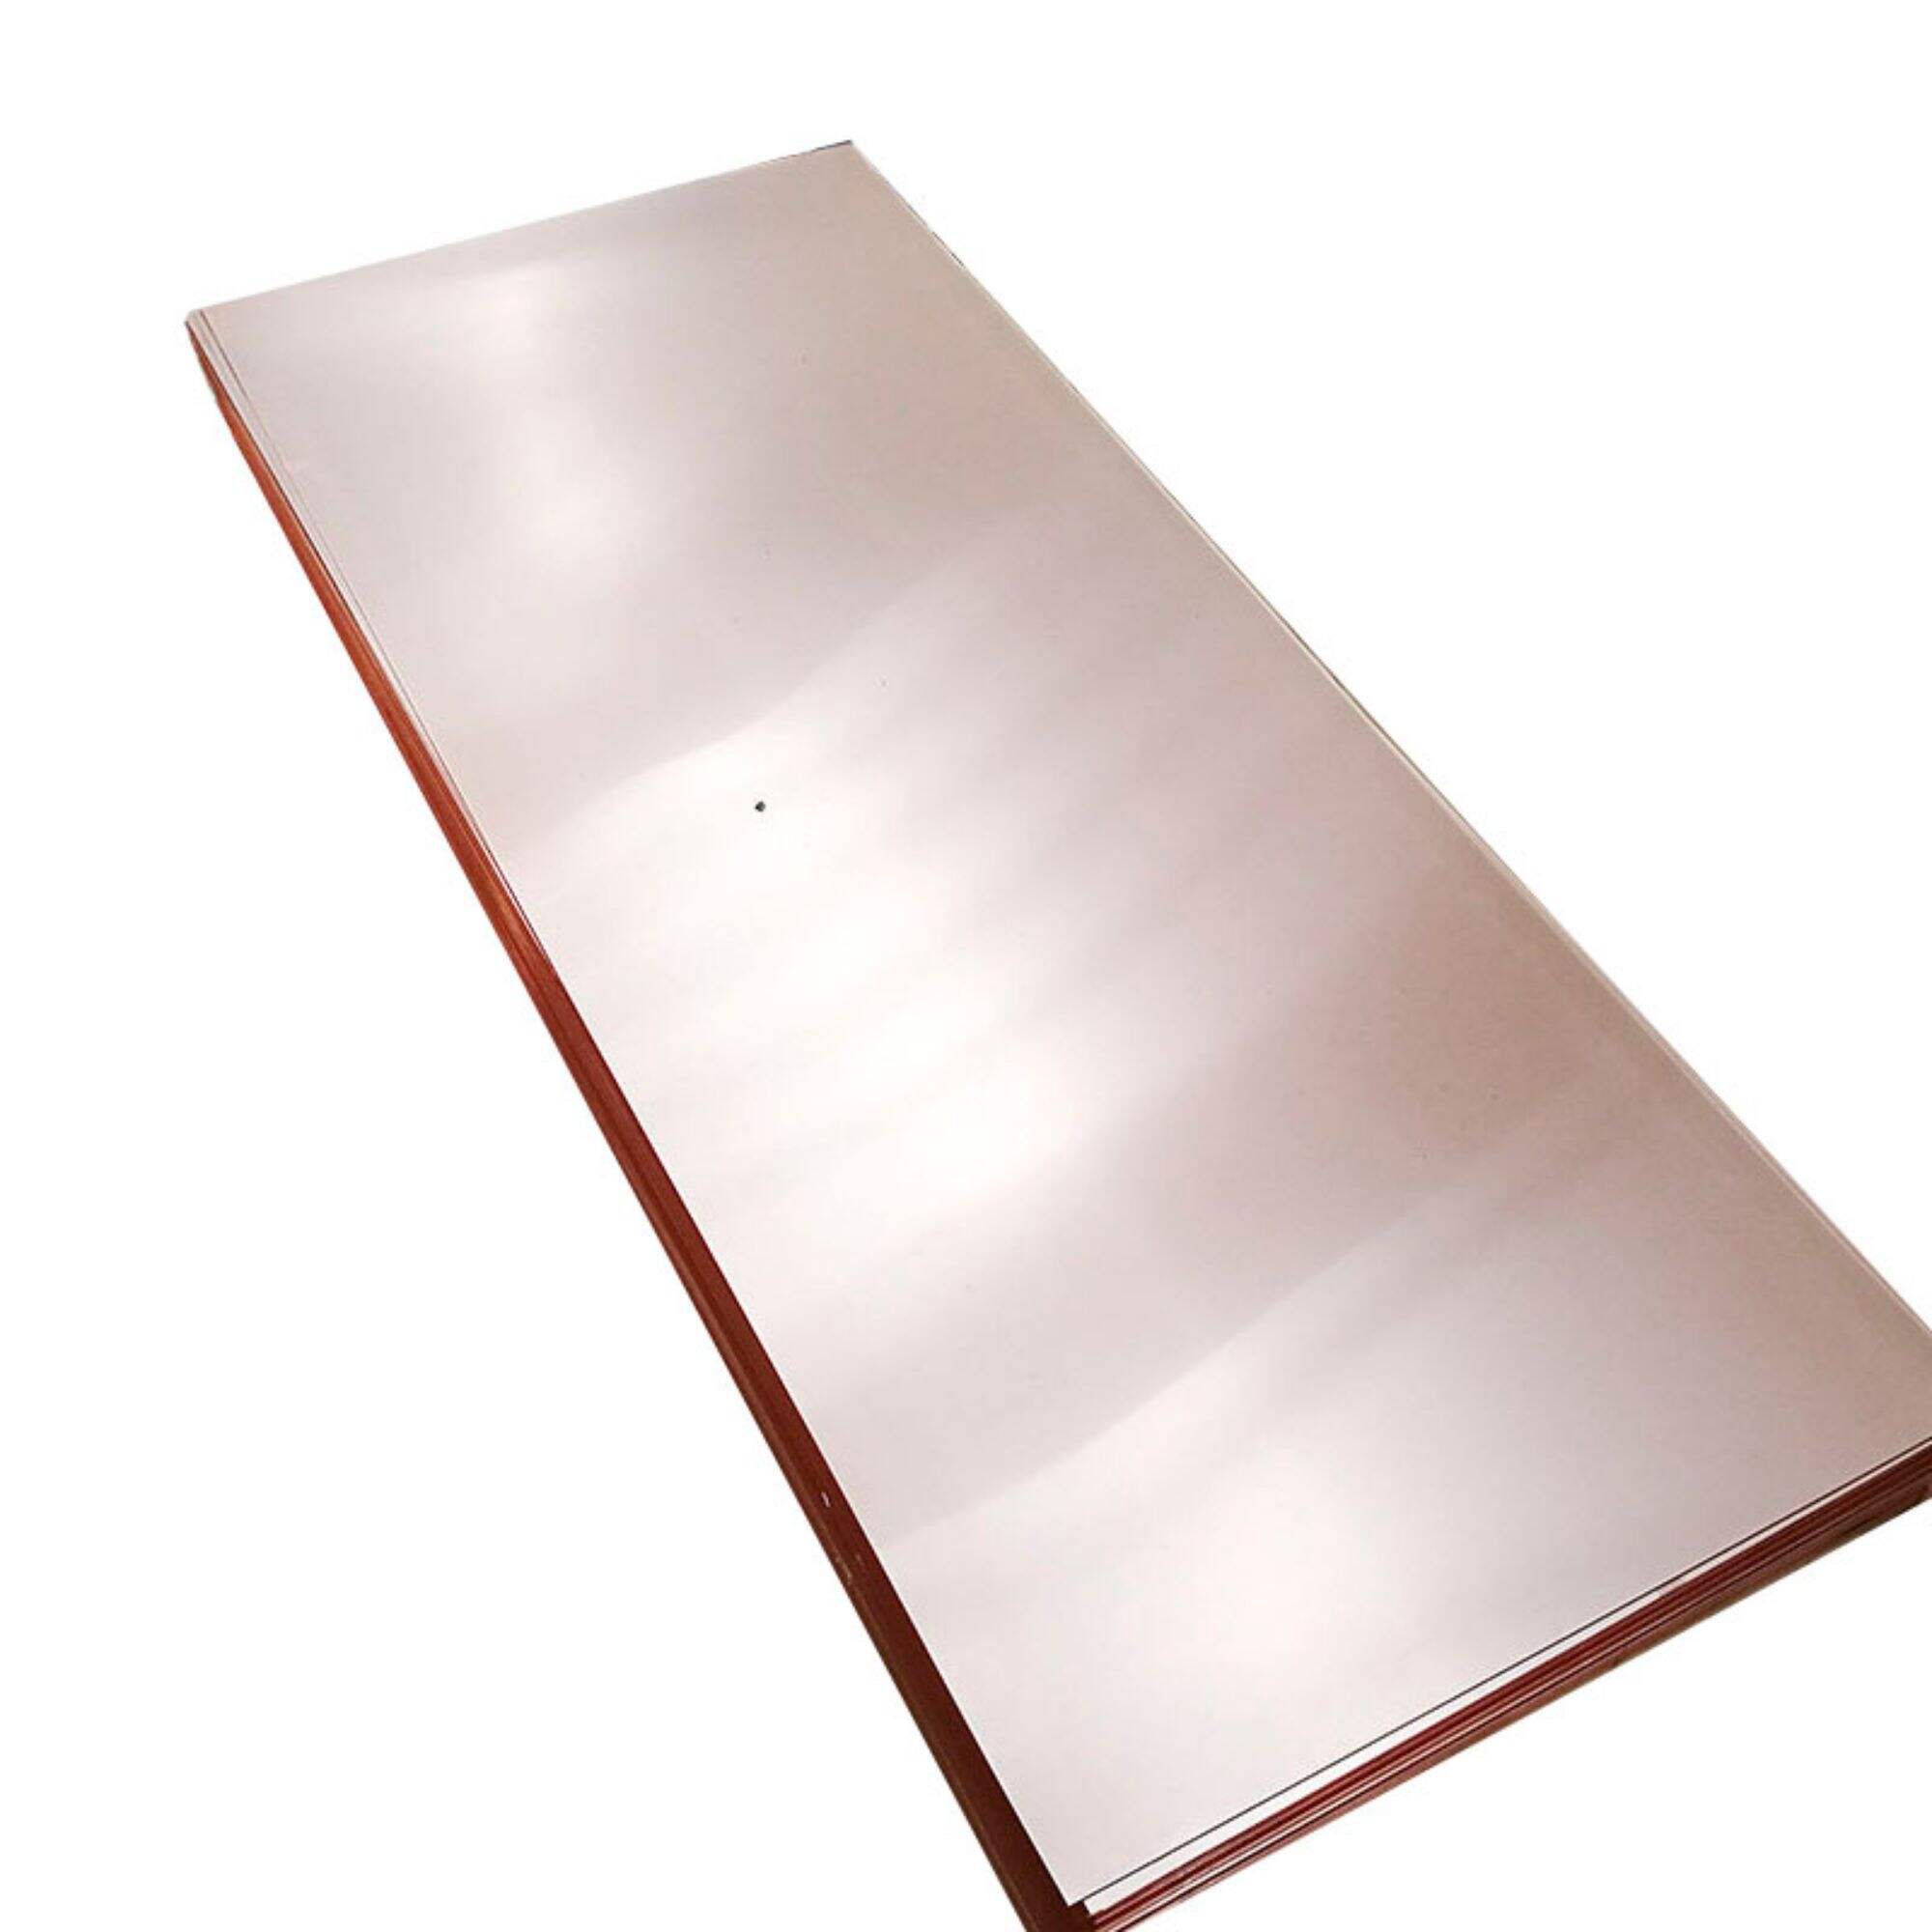 Wholesale price c12200 c11000 c10100 c12000 copper sheet 3mm 4mm 5mm thickness copper plate